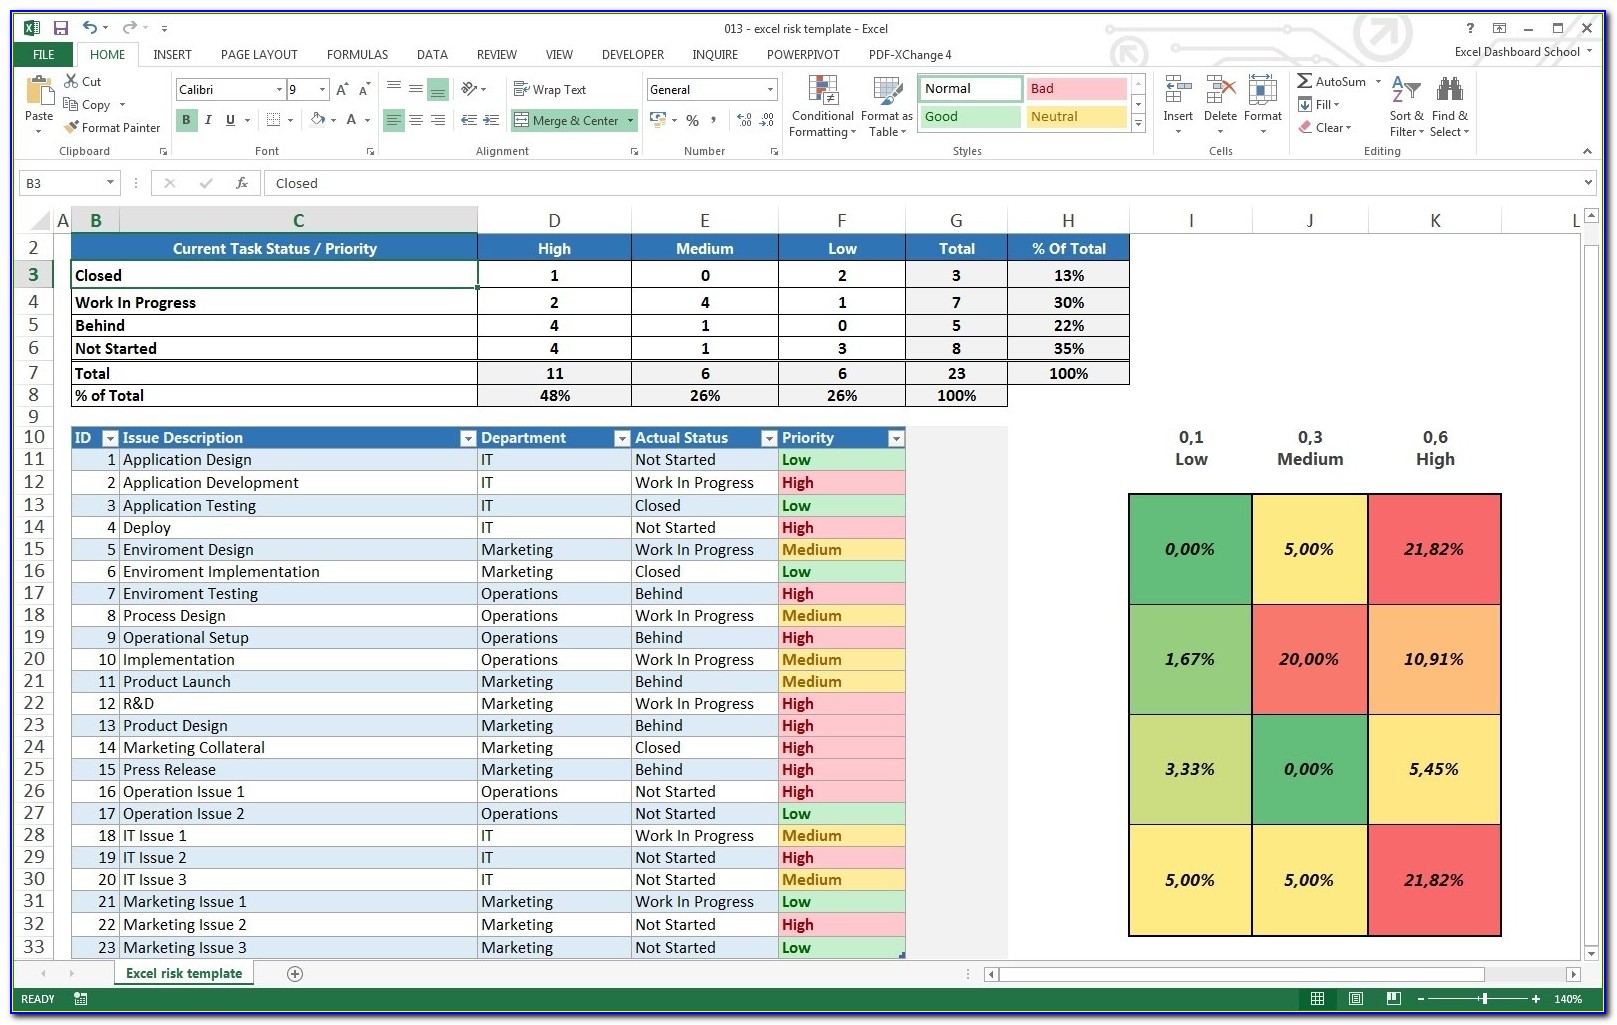 Project Tracking Spreadsheet Template Free